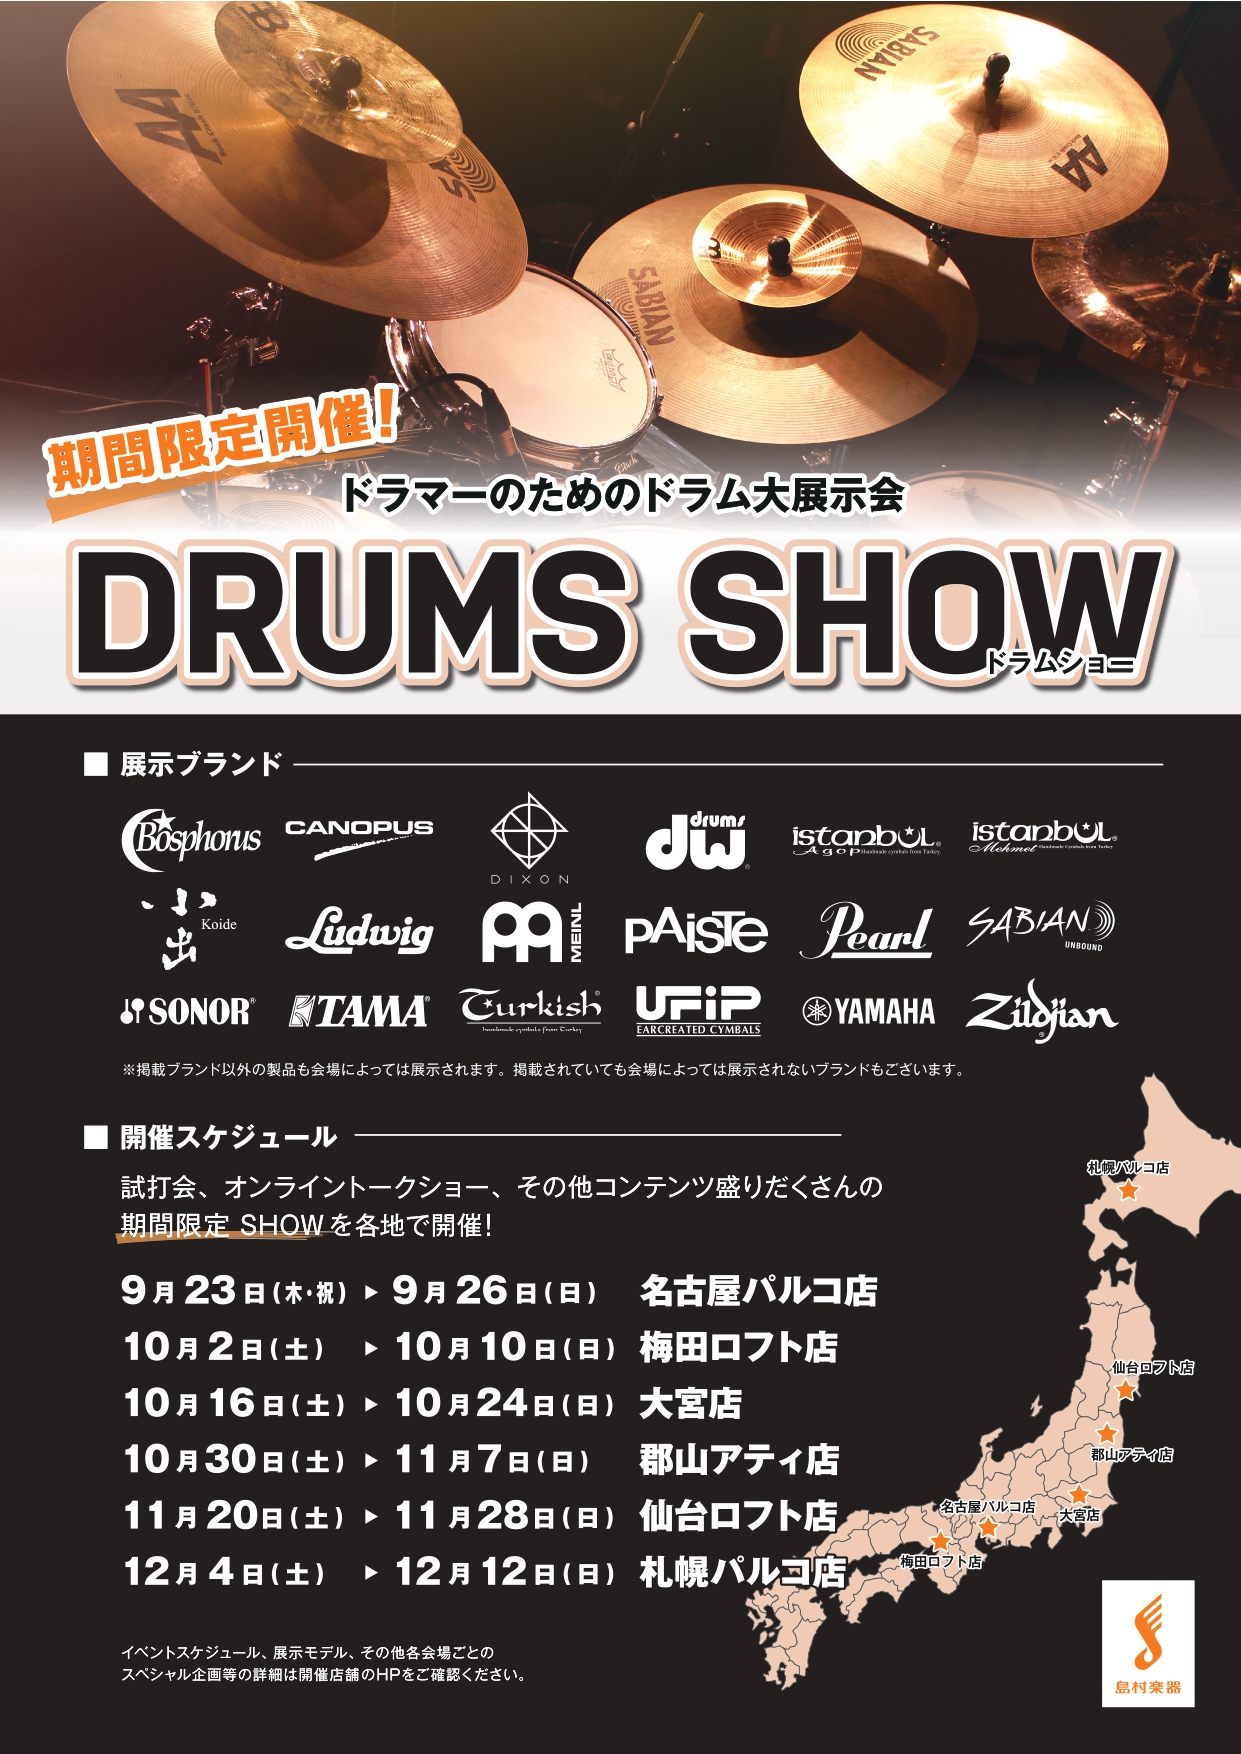 [https://info.shimamura.co.jp/drums/article/drums-show-2021::title=] 国内外のドラム/シンバルメーカー製品を一堂に集めた「試せる」「買える」展示会、島村楽器「DRUMS SHOW 2021~UNITE~」の開催が決定しました！]]東 […]